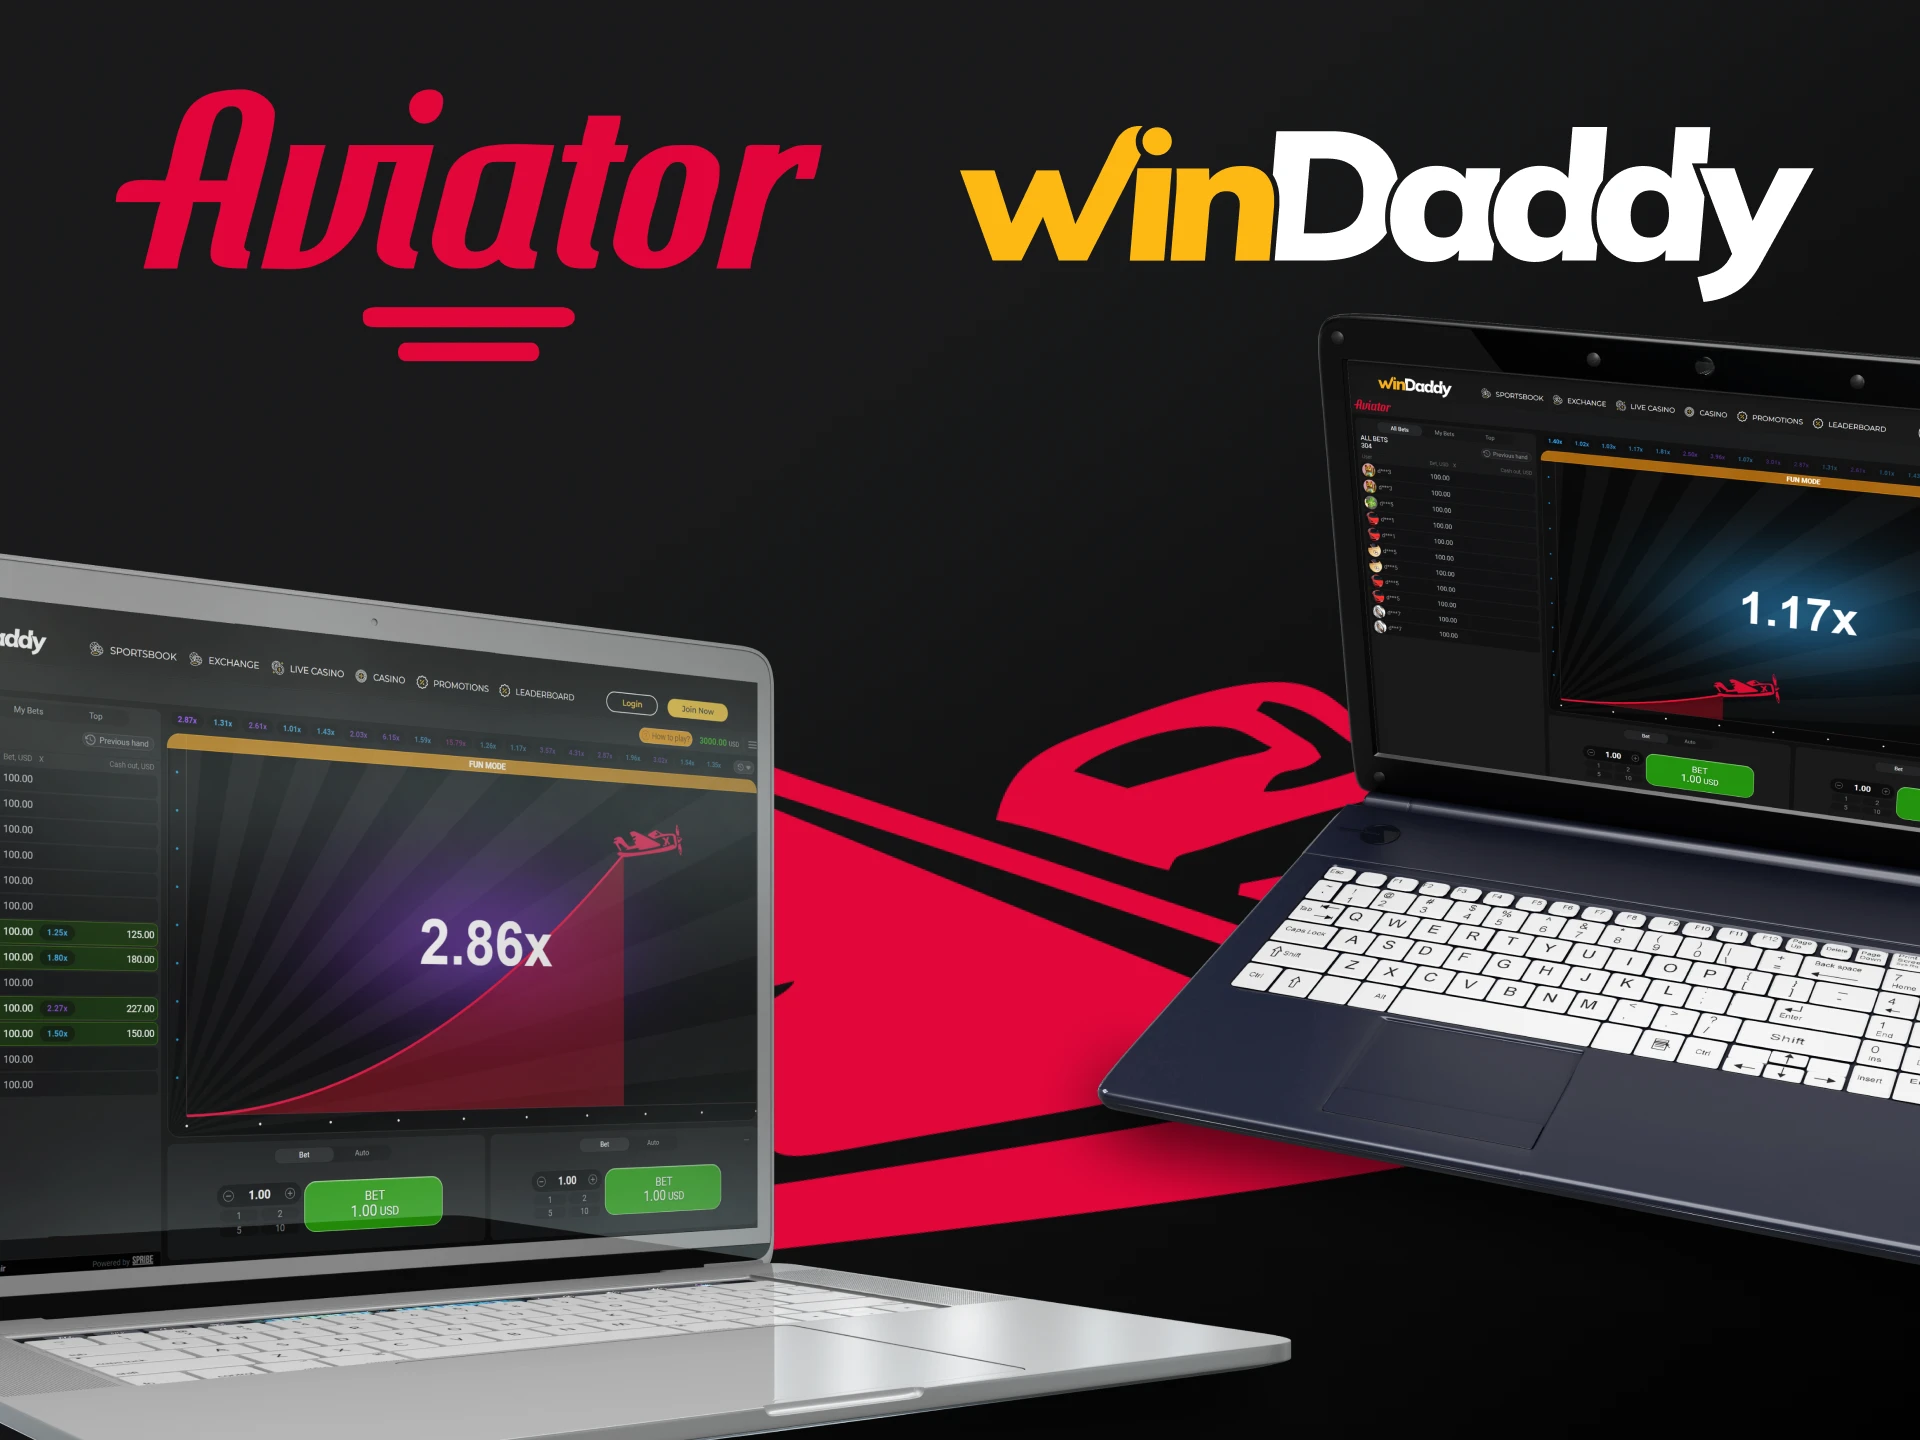 Find out which device is best for WinDaddy's Aviator.